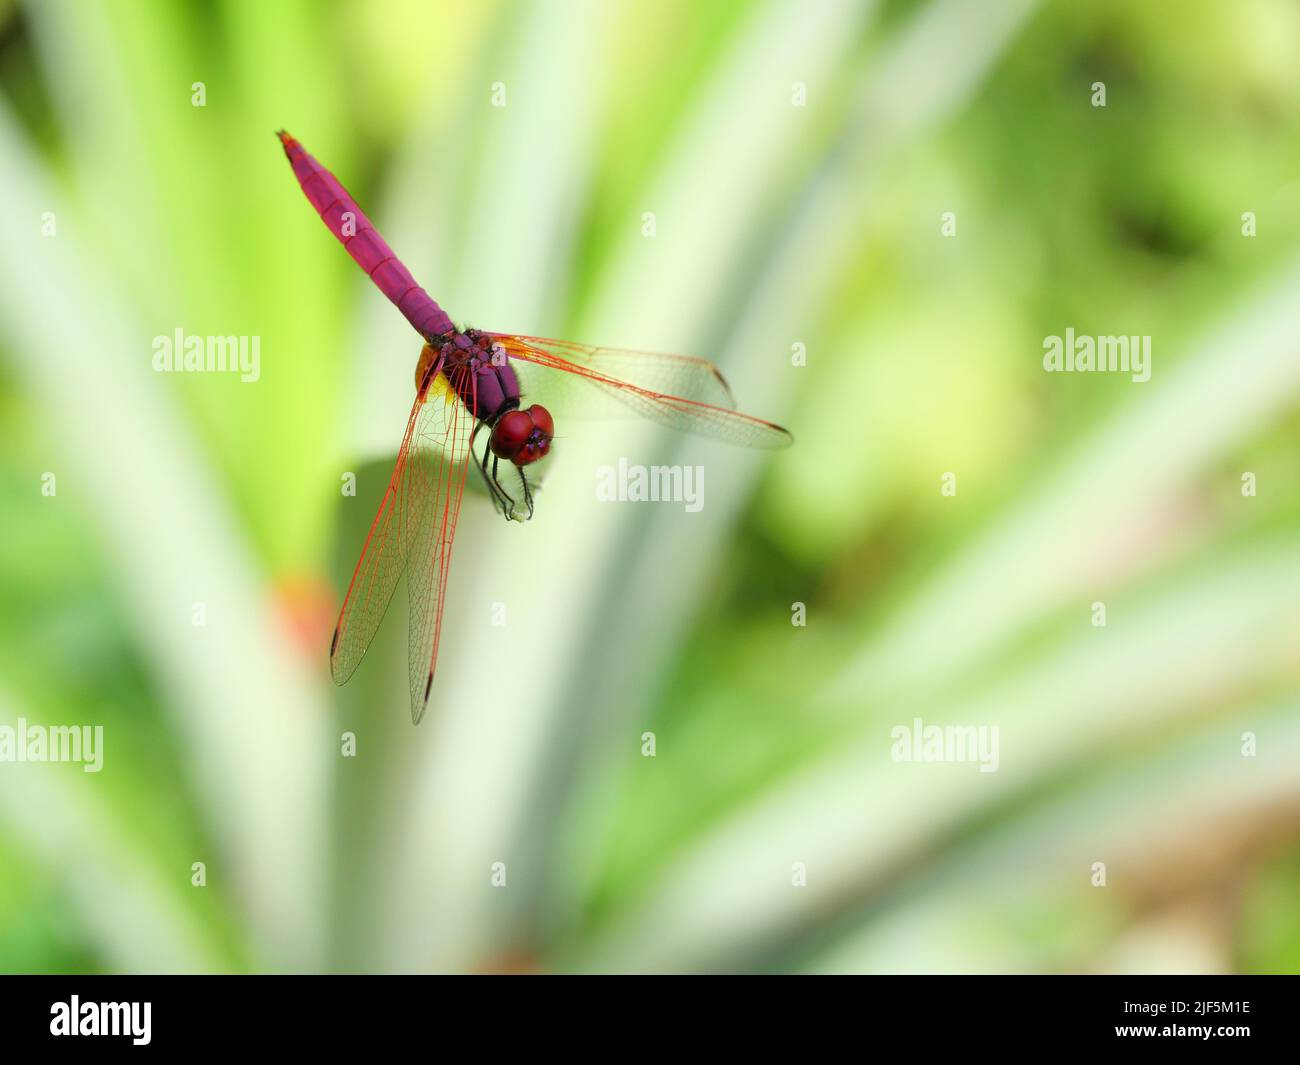 Crimson Marsh Glider dragonfly or Trithemis aurora on pineapple leaf, Beautiful pink dragonfly with red eye, Predator insect on with natural green bac Stock Photo